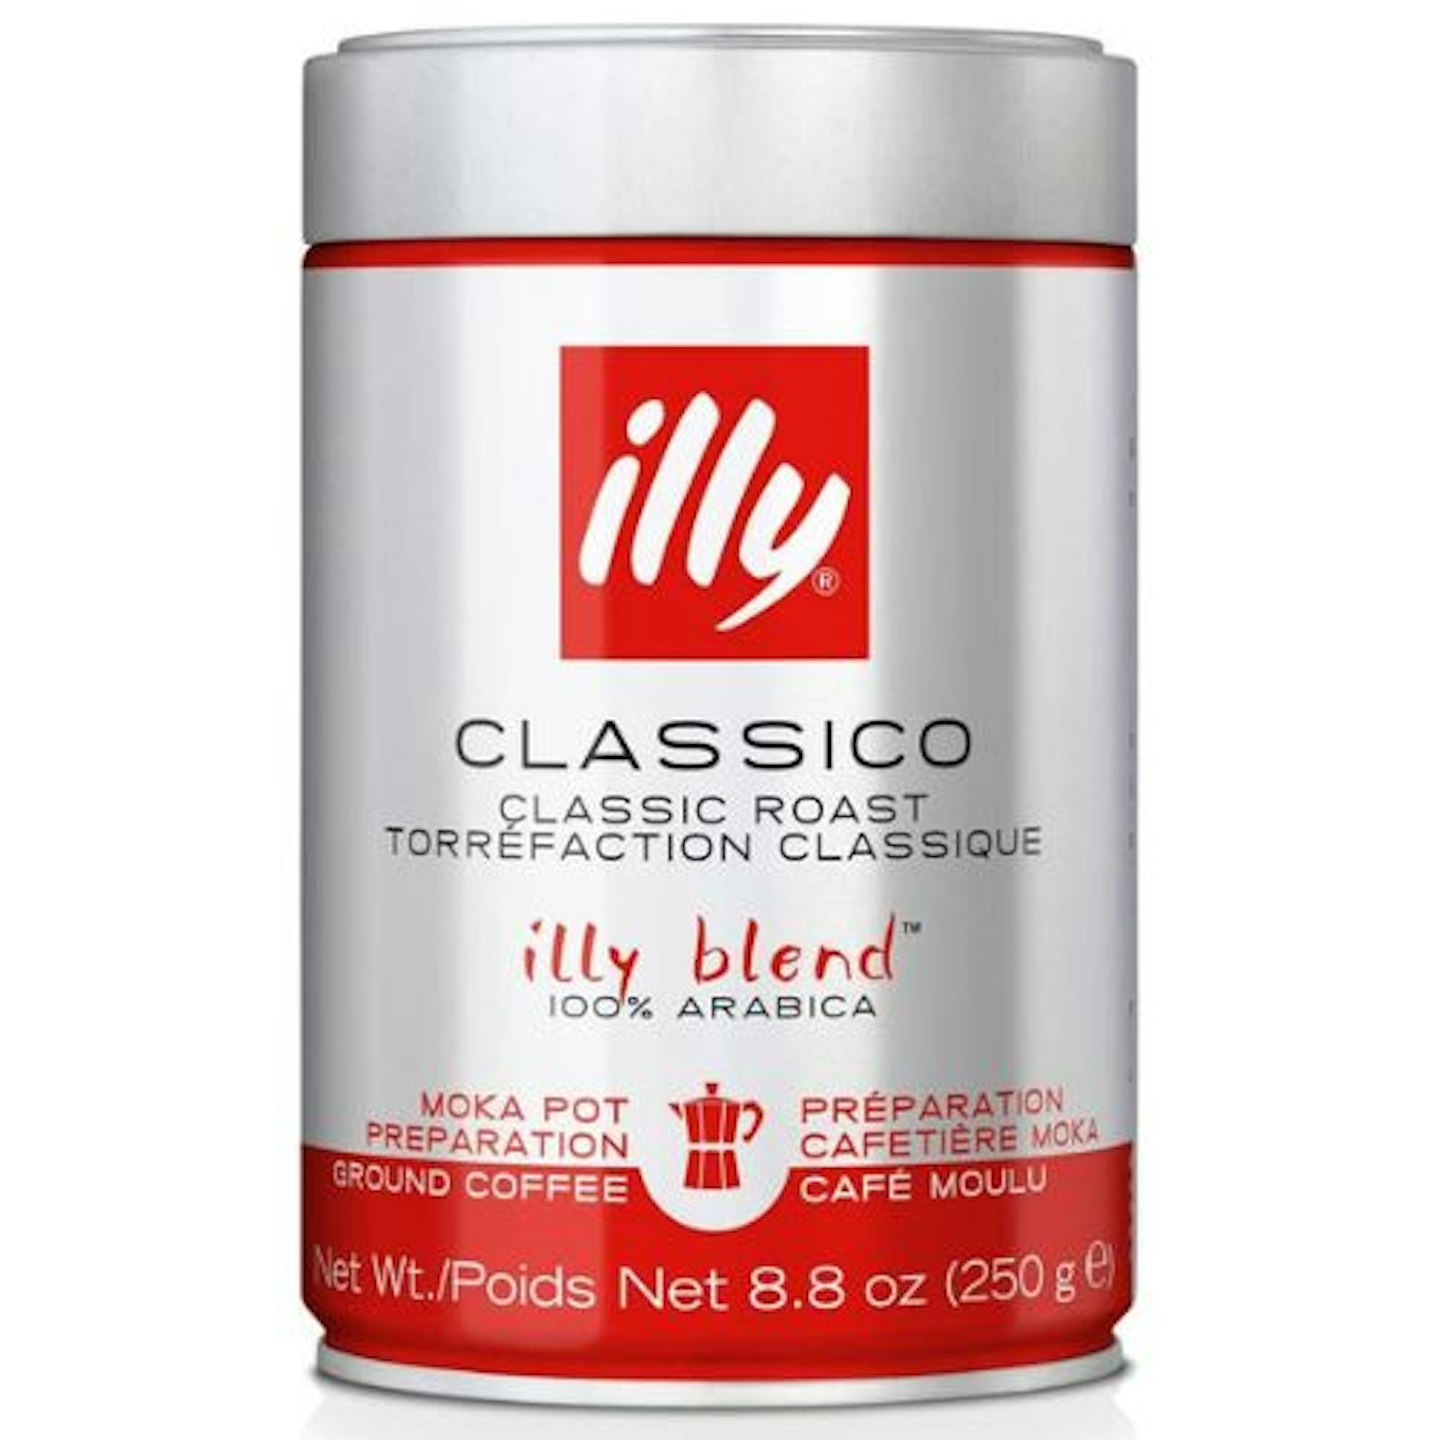  illy, Classico Ground Coffee 